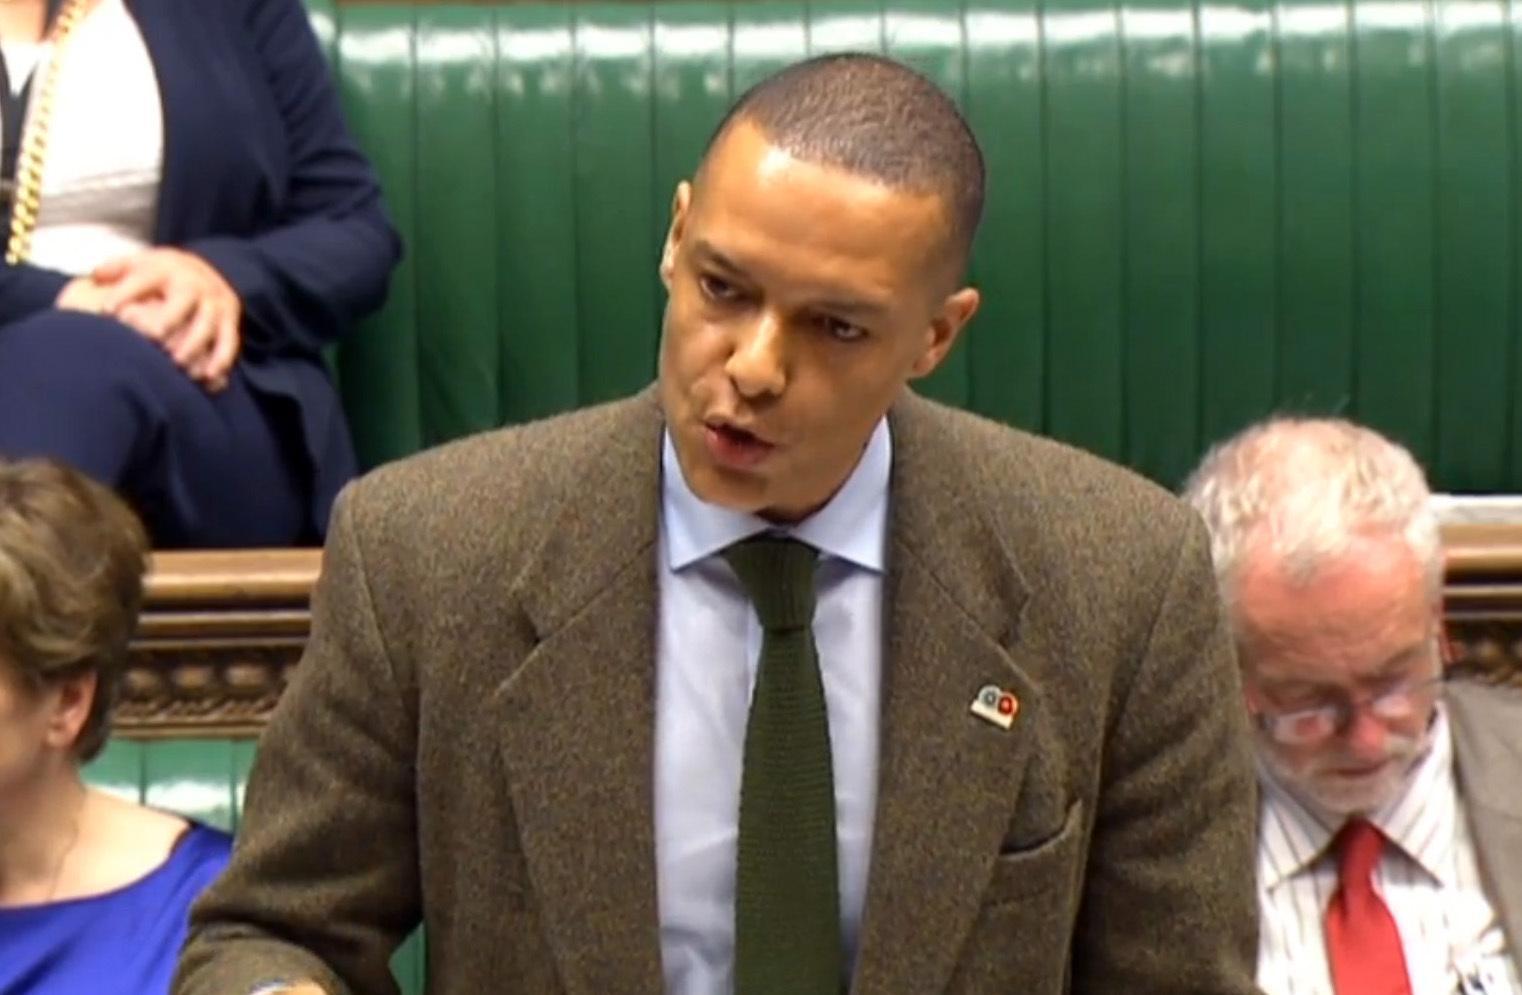 Clive Lewis remains Labour's defence spokesperson in the House of Commons